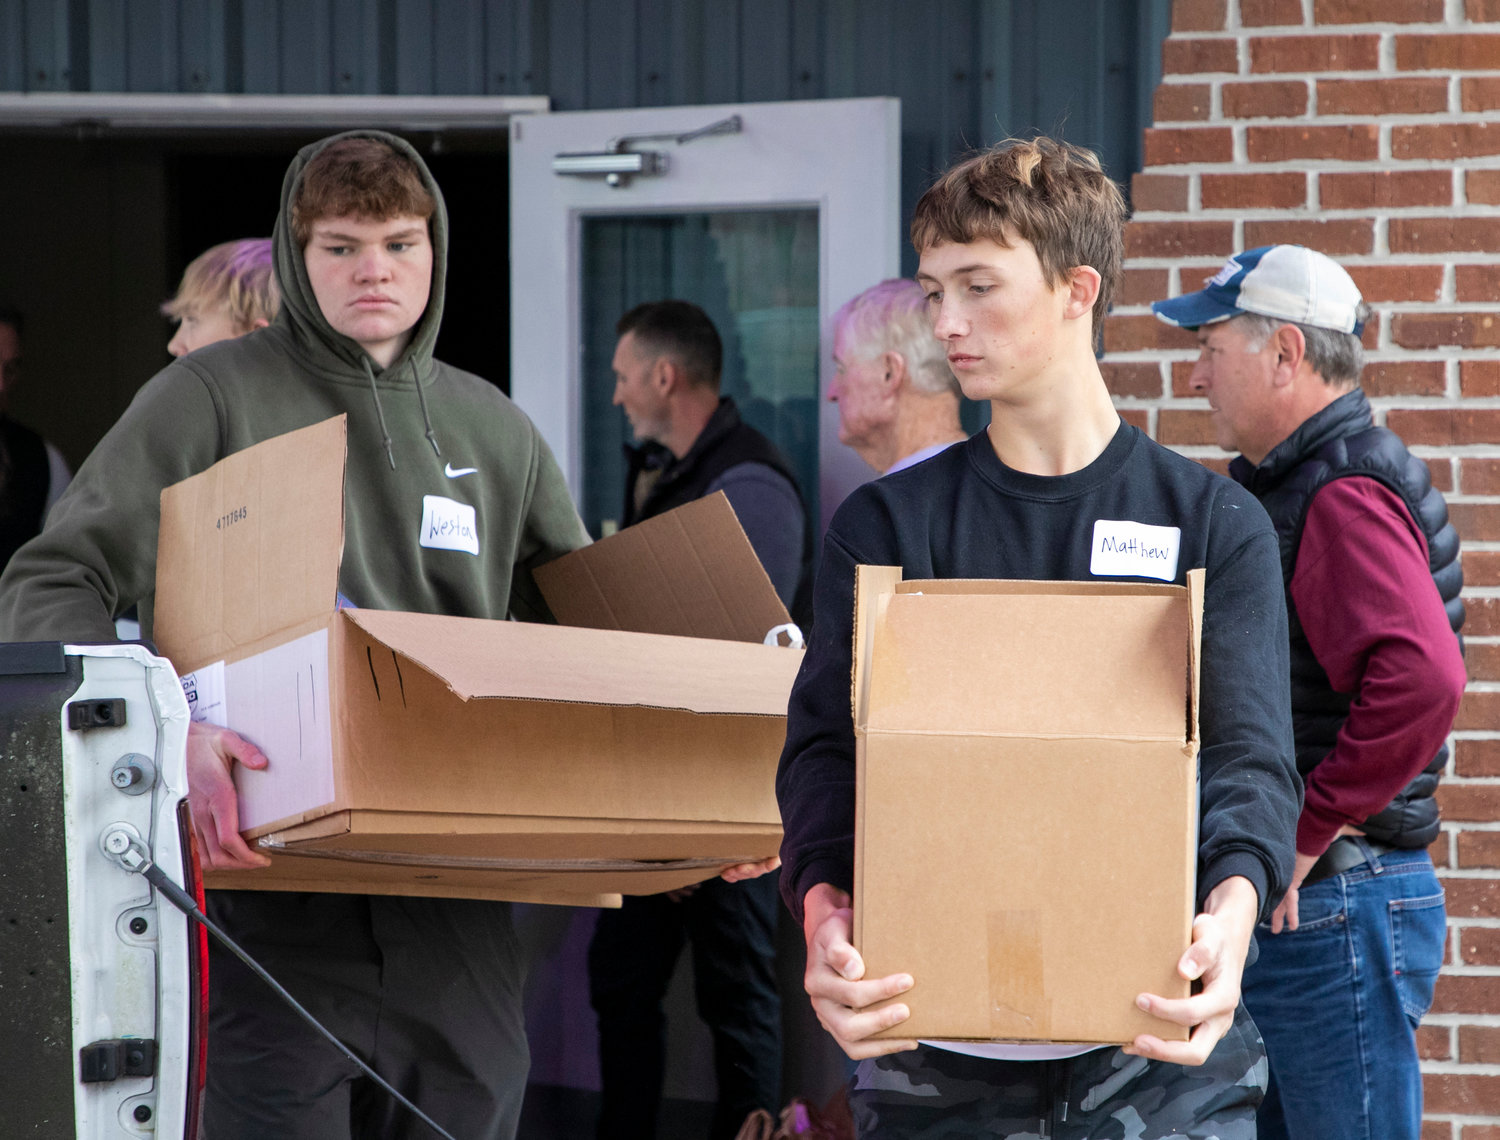 Matthew Steele and Weston Lee were among Orange Beach High School students who were part of the over 100 volunteers helping distribute Thanksgiving meals at The Island Church Nov. 19. The Island Mobile Food Pantry saw its largest turnout yet with 222 families signed up.